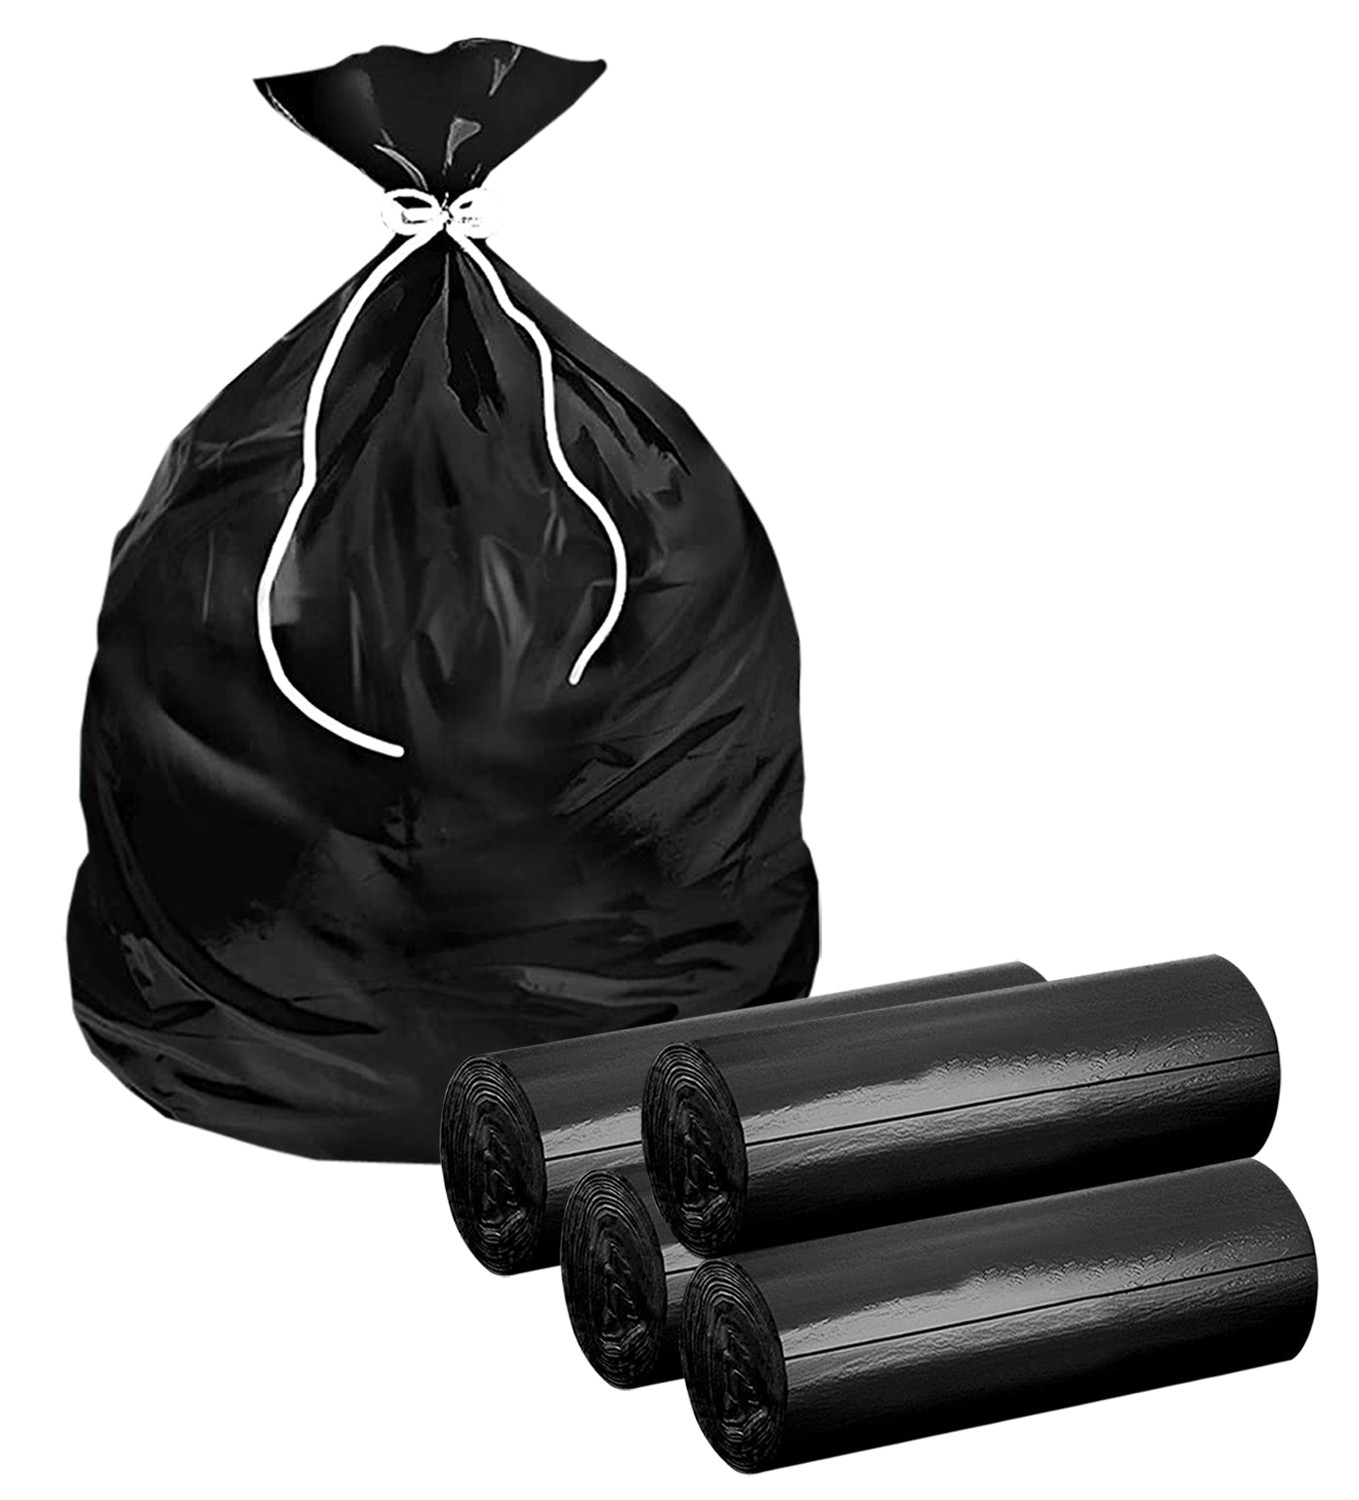 Kuber Industries Jumbo Biodegradable Garbage Bags, Dustbin Bags, Trash Bags For Kitchen, Office, Warehouse, Pantry or Washroom, 36x48 Inches (Black)-HS41KUBMART24056